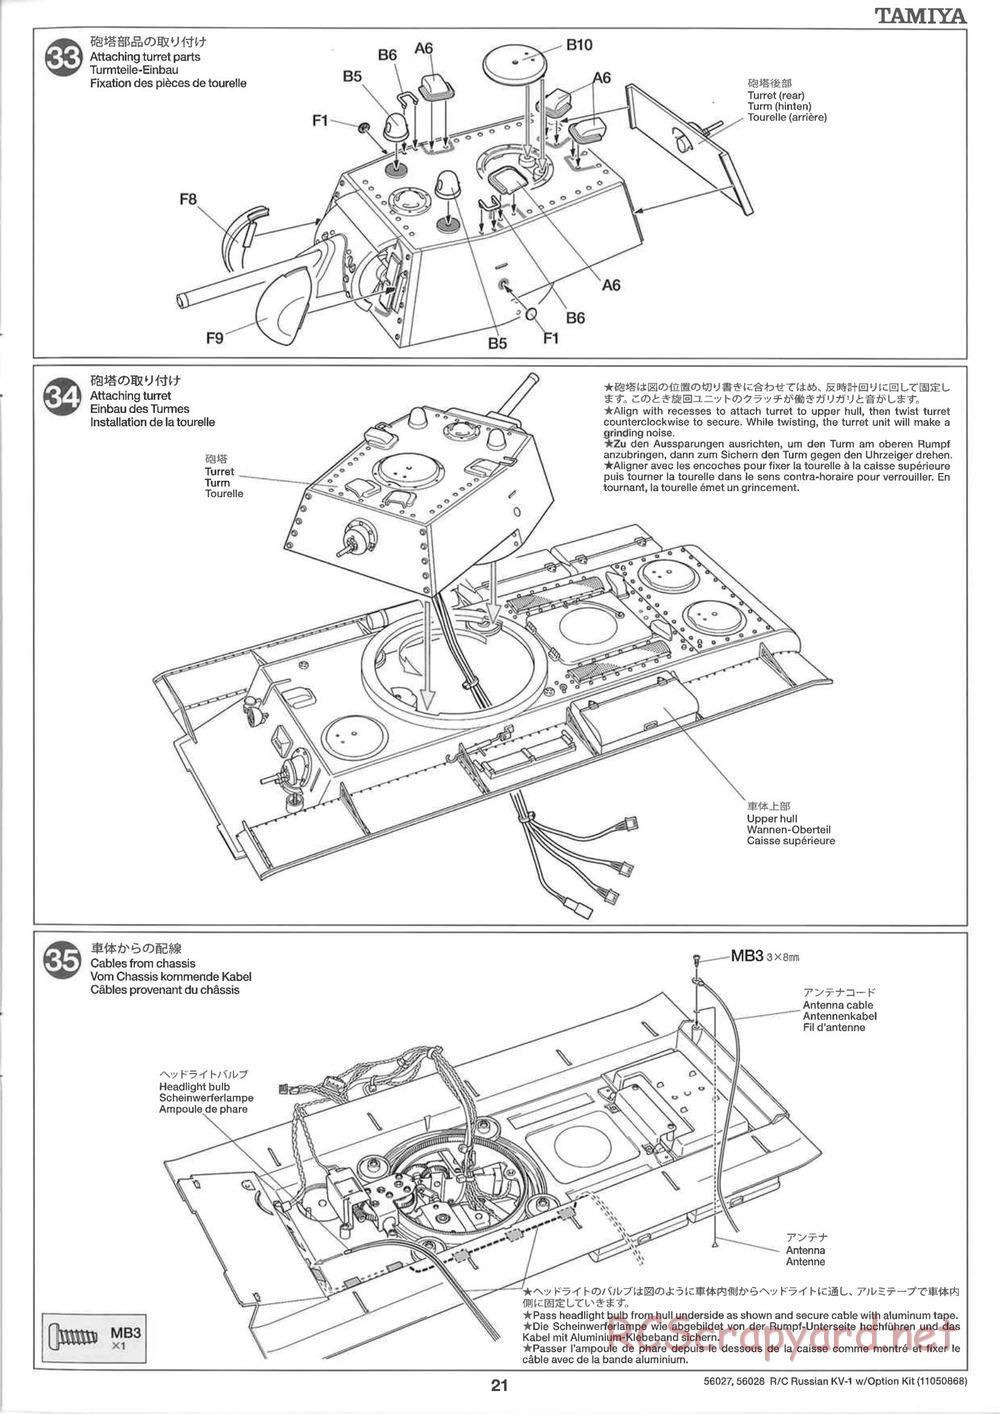 Tamiya - Russian Heavy Tank KV-1 - 1/16 Scale Chassis - Manual - Page 21